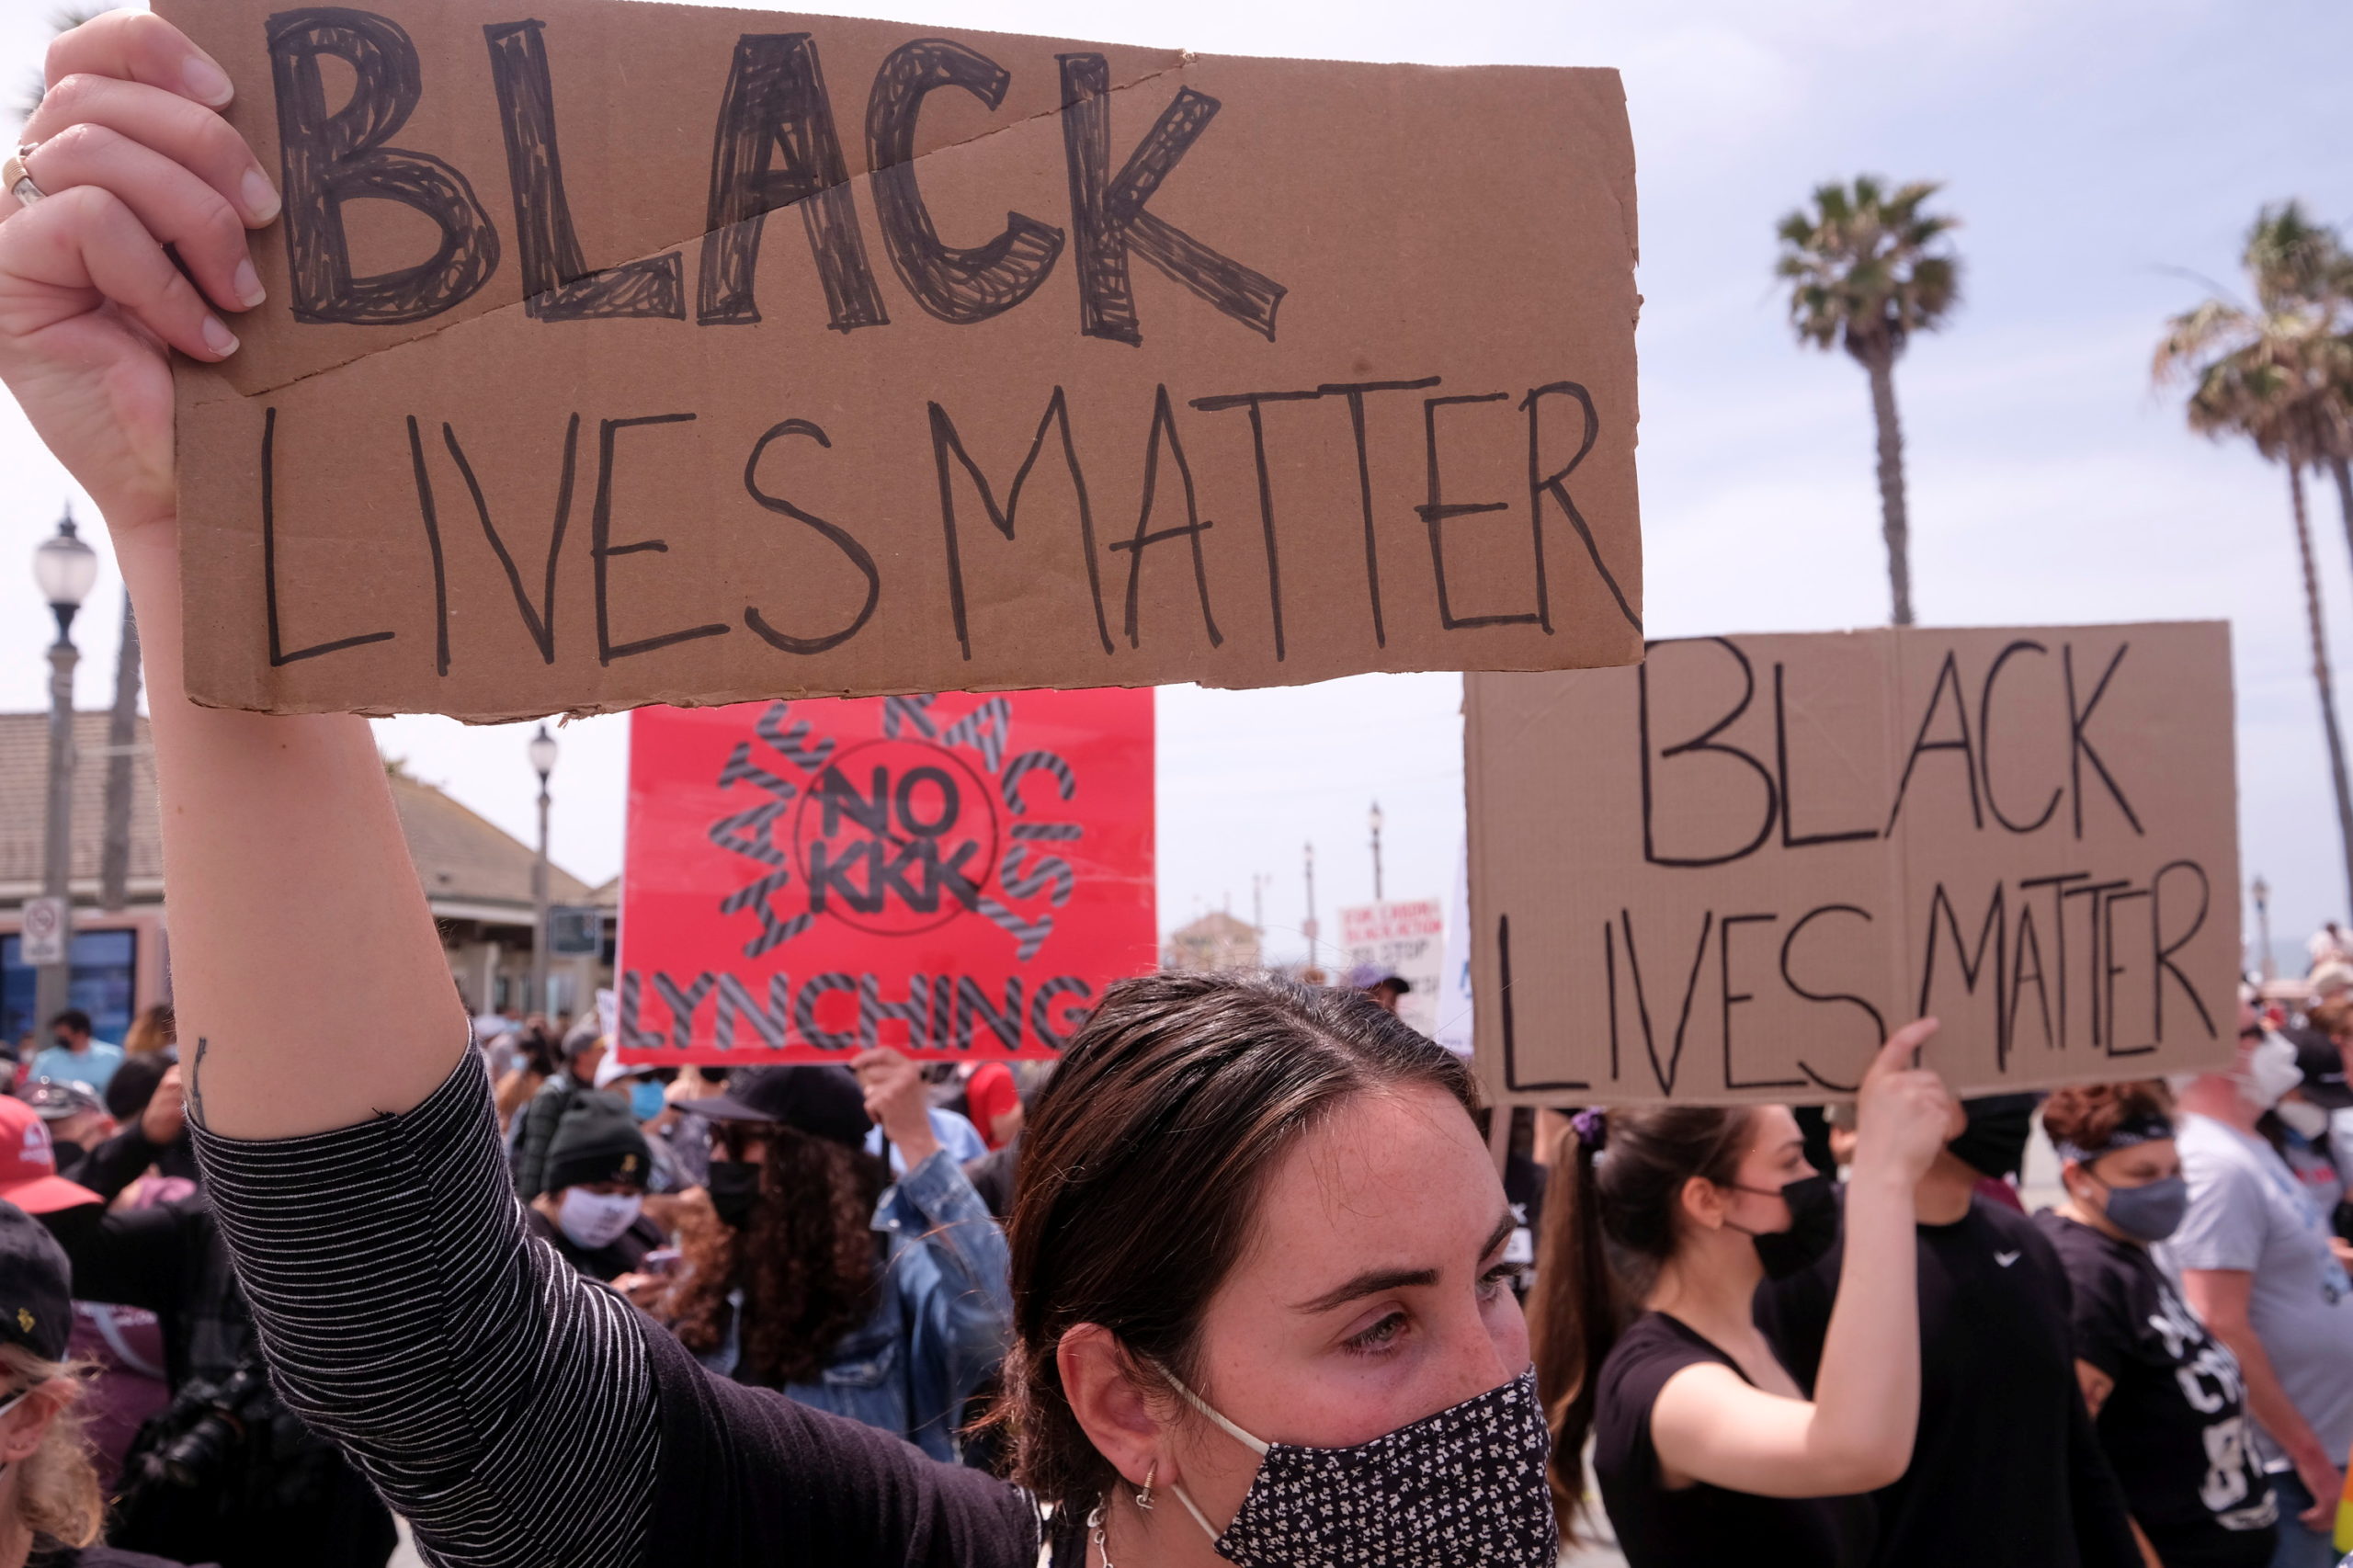 Demonstrators holding signs take part in a Black Lives Matter protest in Huntington Beach, California, U.S. April 11, 2021. REUTERS/Ringo Chiu